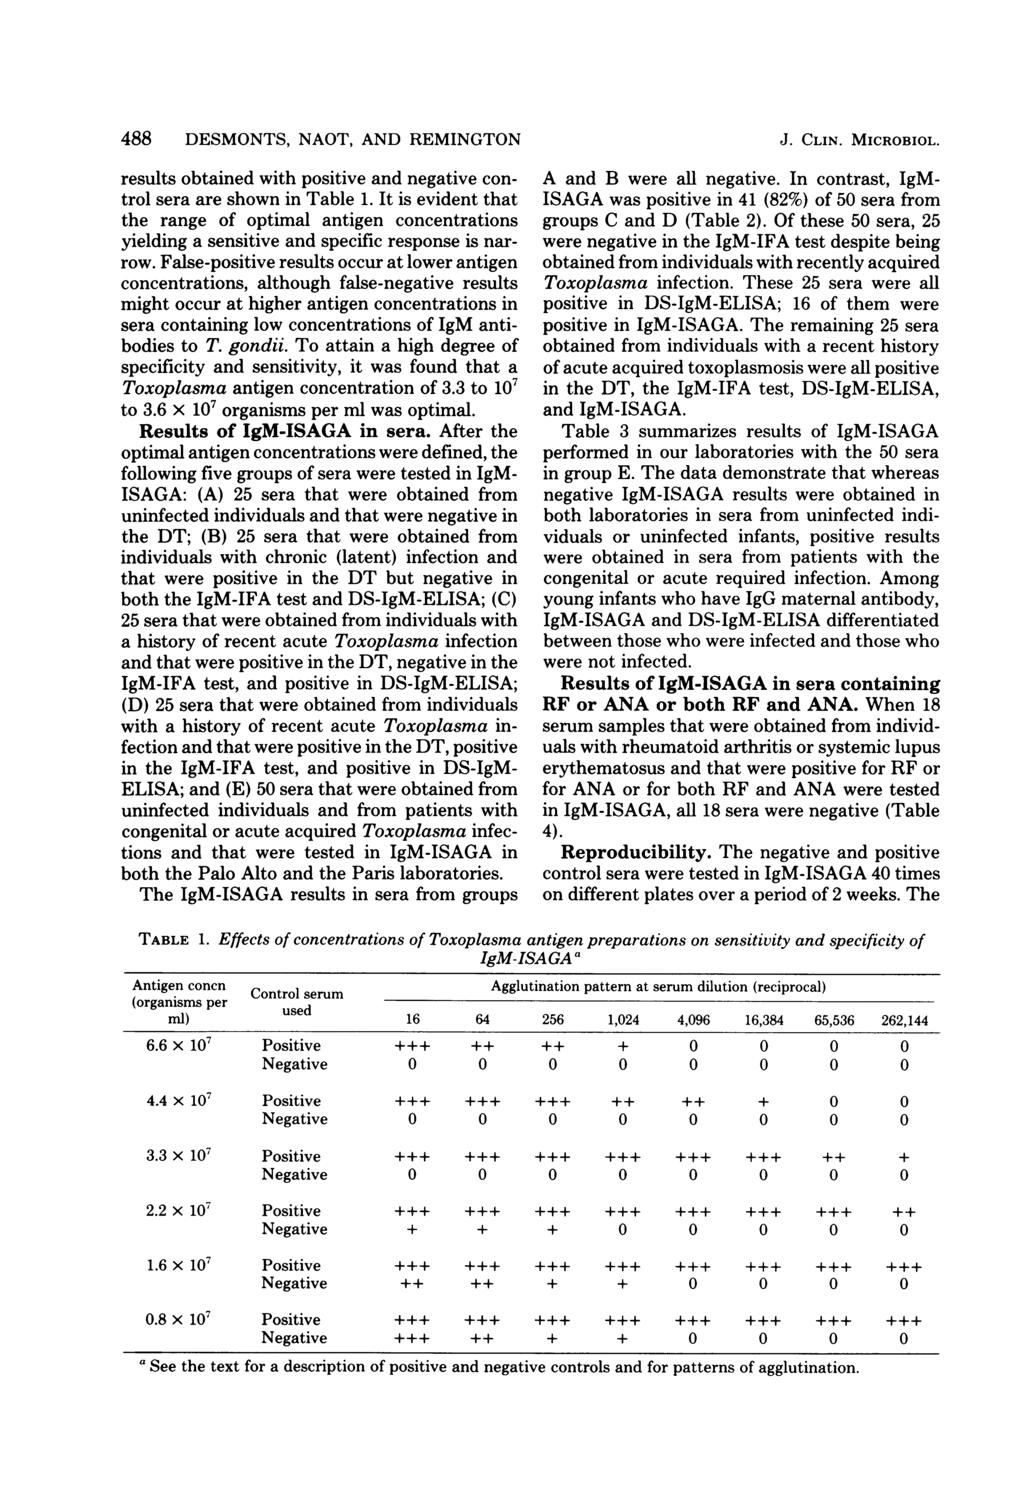 488 DESMONTS, NAOT, AND REMINGTON results obtained with positive and negative control sera are shown in Table 1.